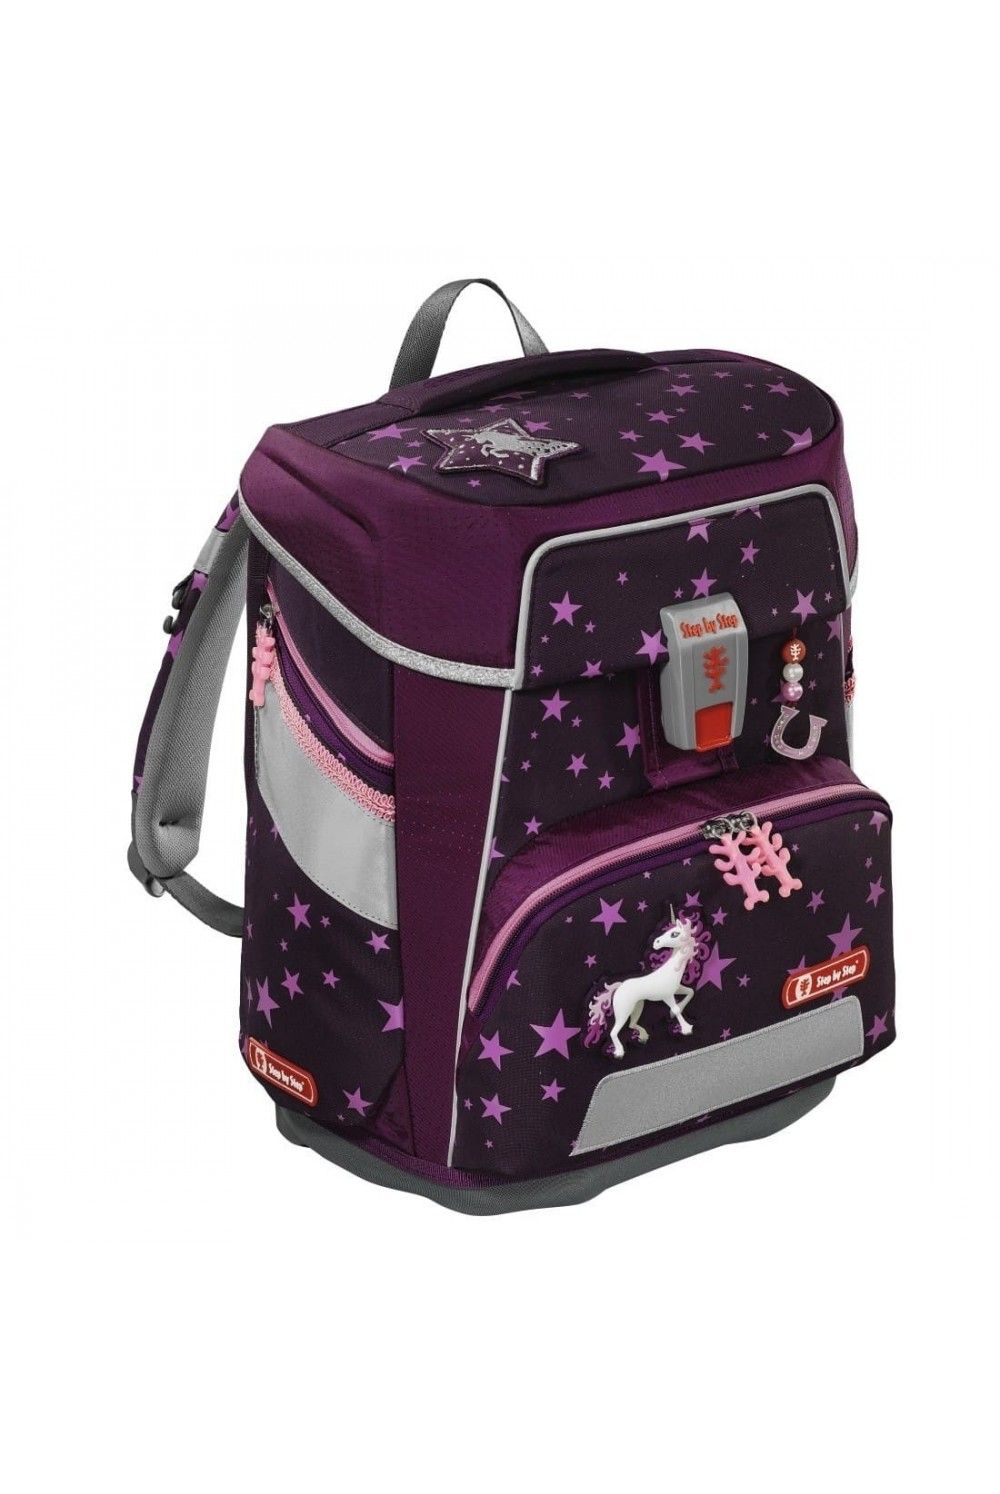 School backpack set Step by Step Space 5 pieces Unicorn